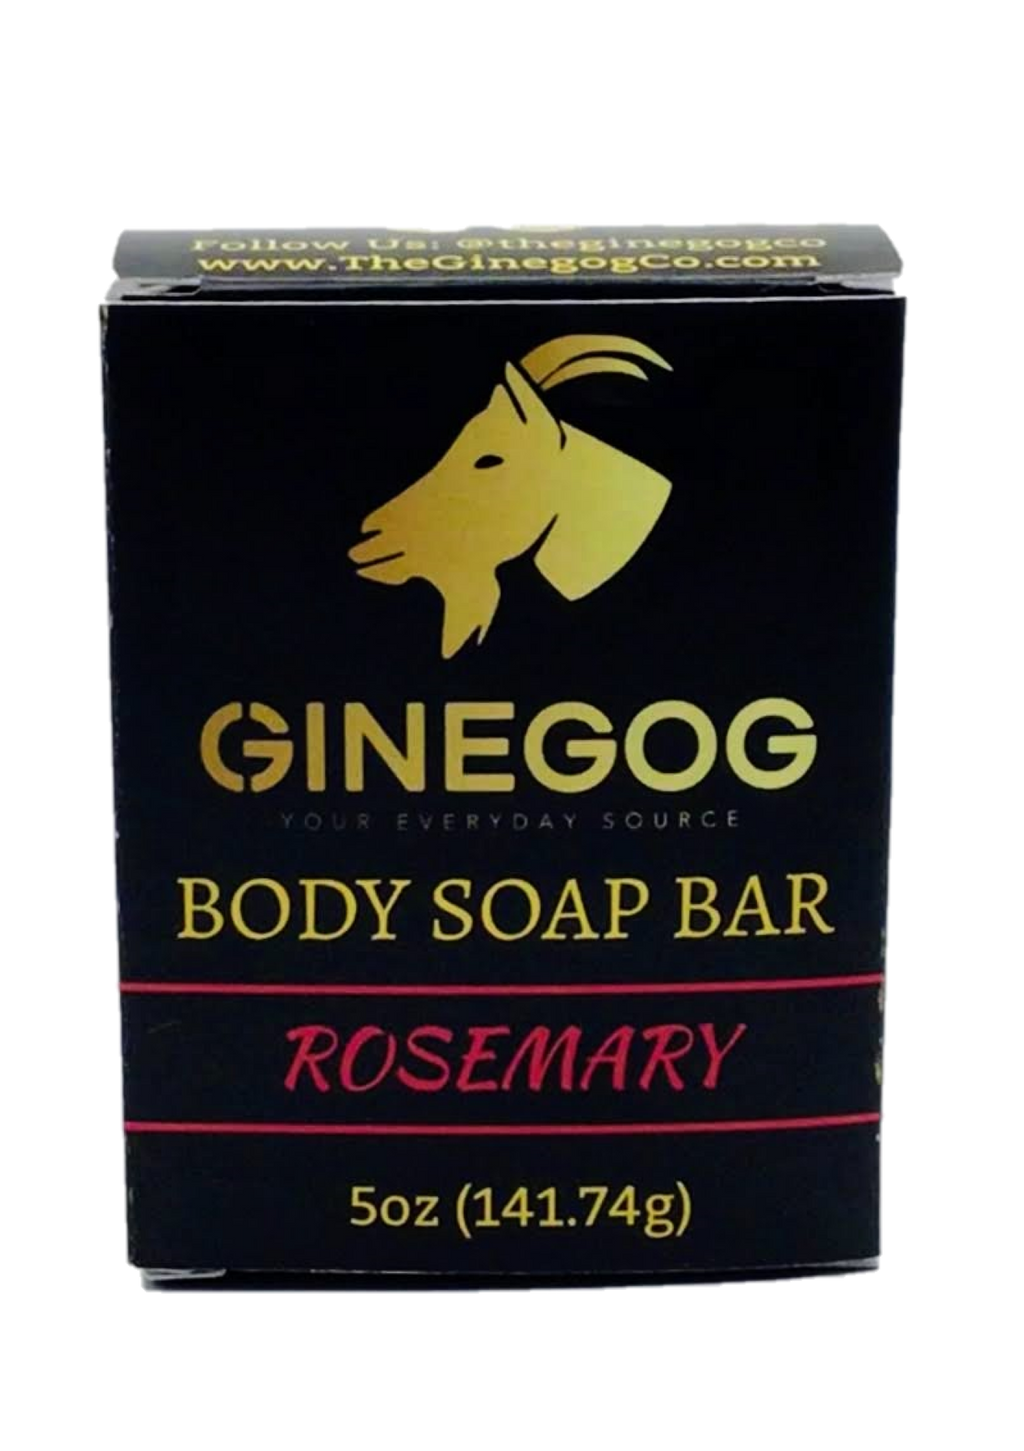 GINEGOG BODY SOAP BAR with Rosemary